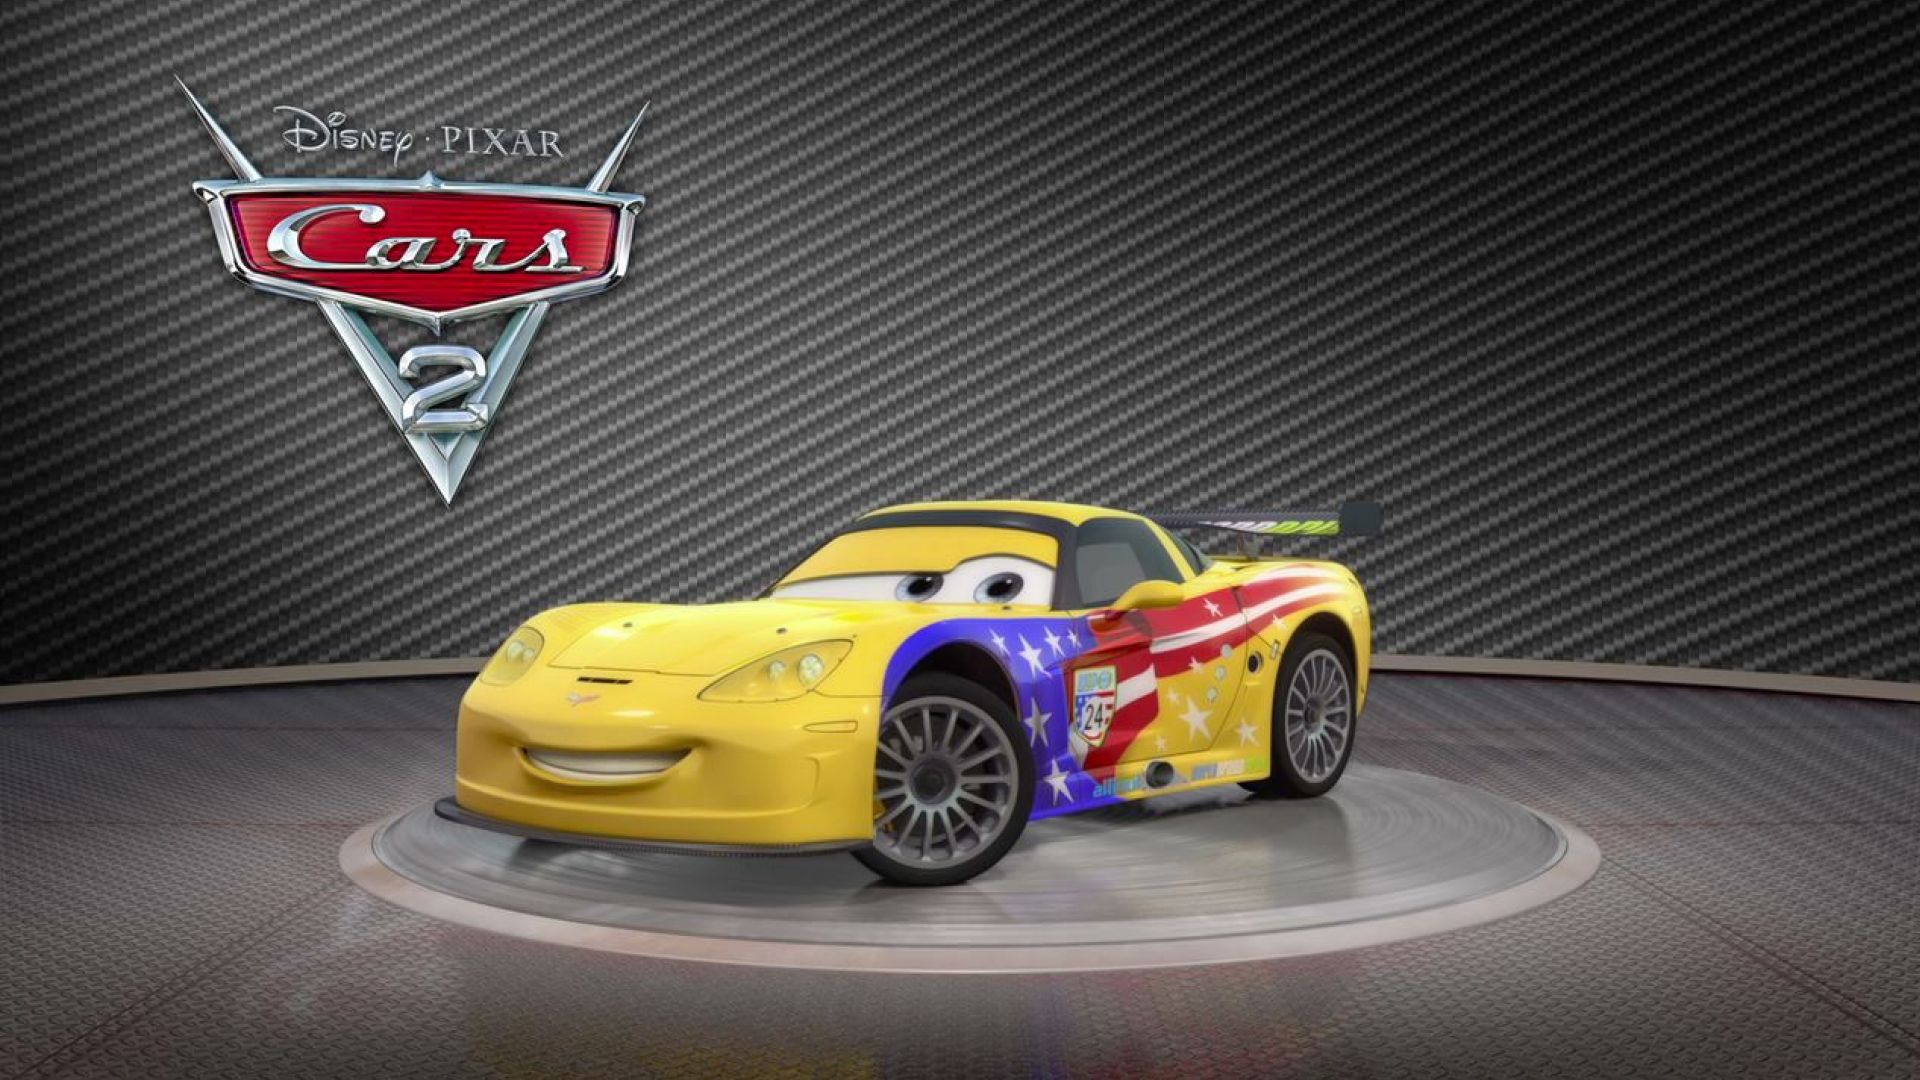 Jeff Corvette shows of his yellow rims and turns around in Cars 2